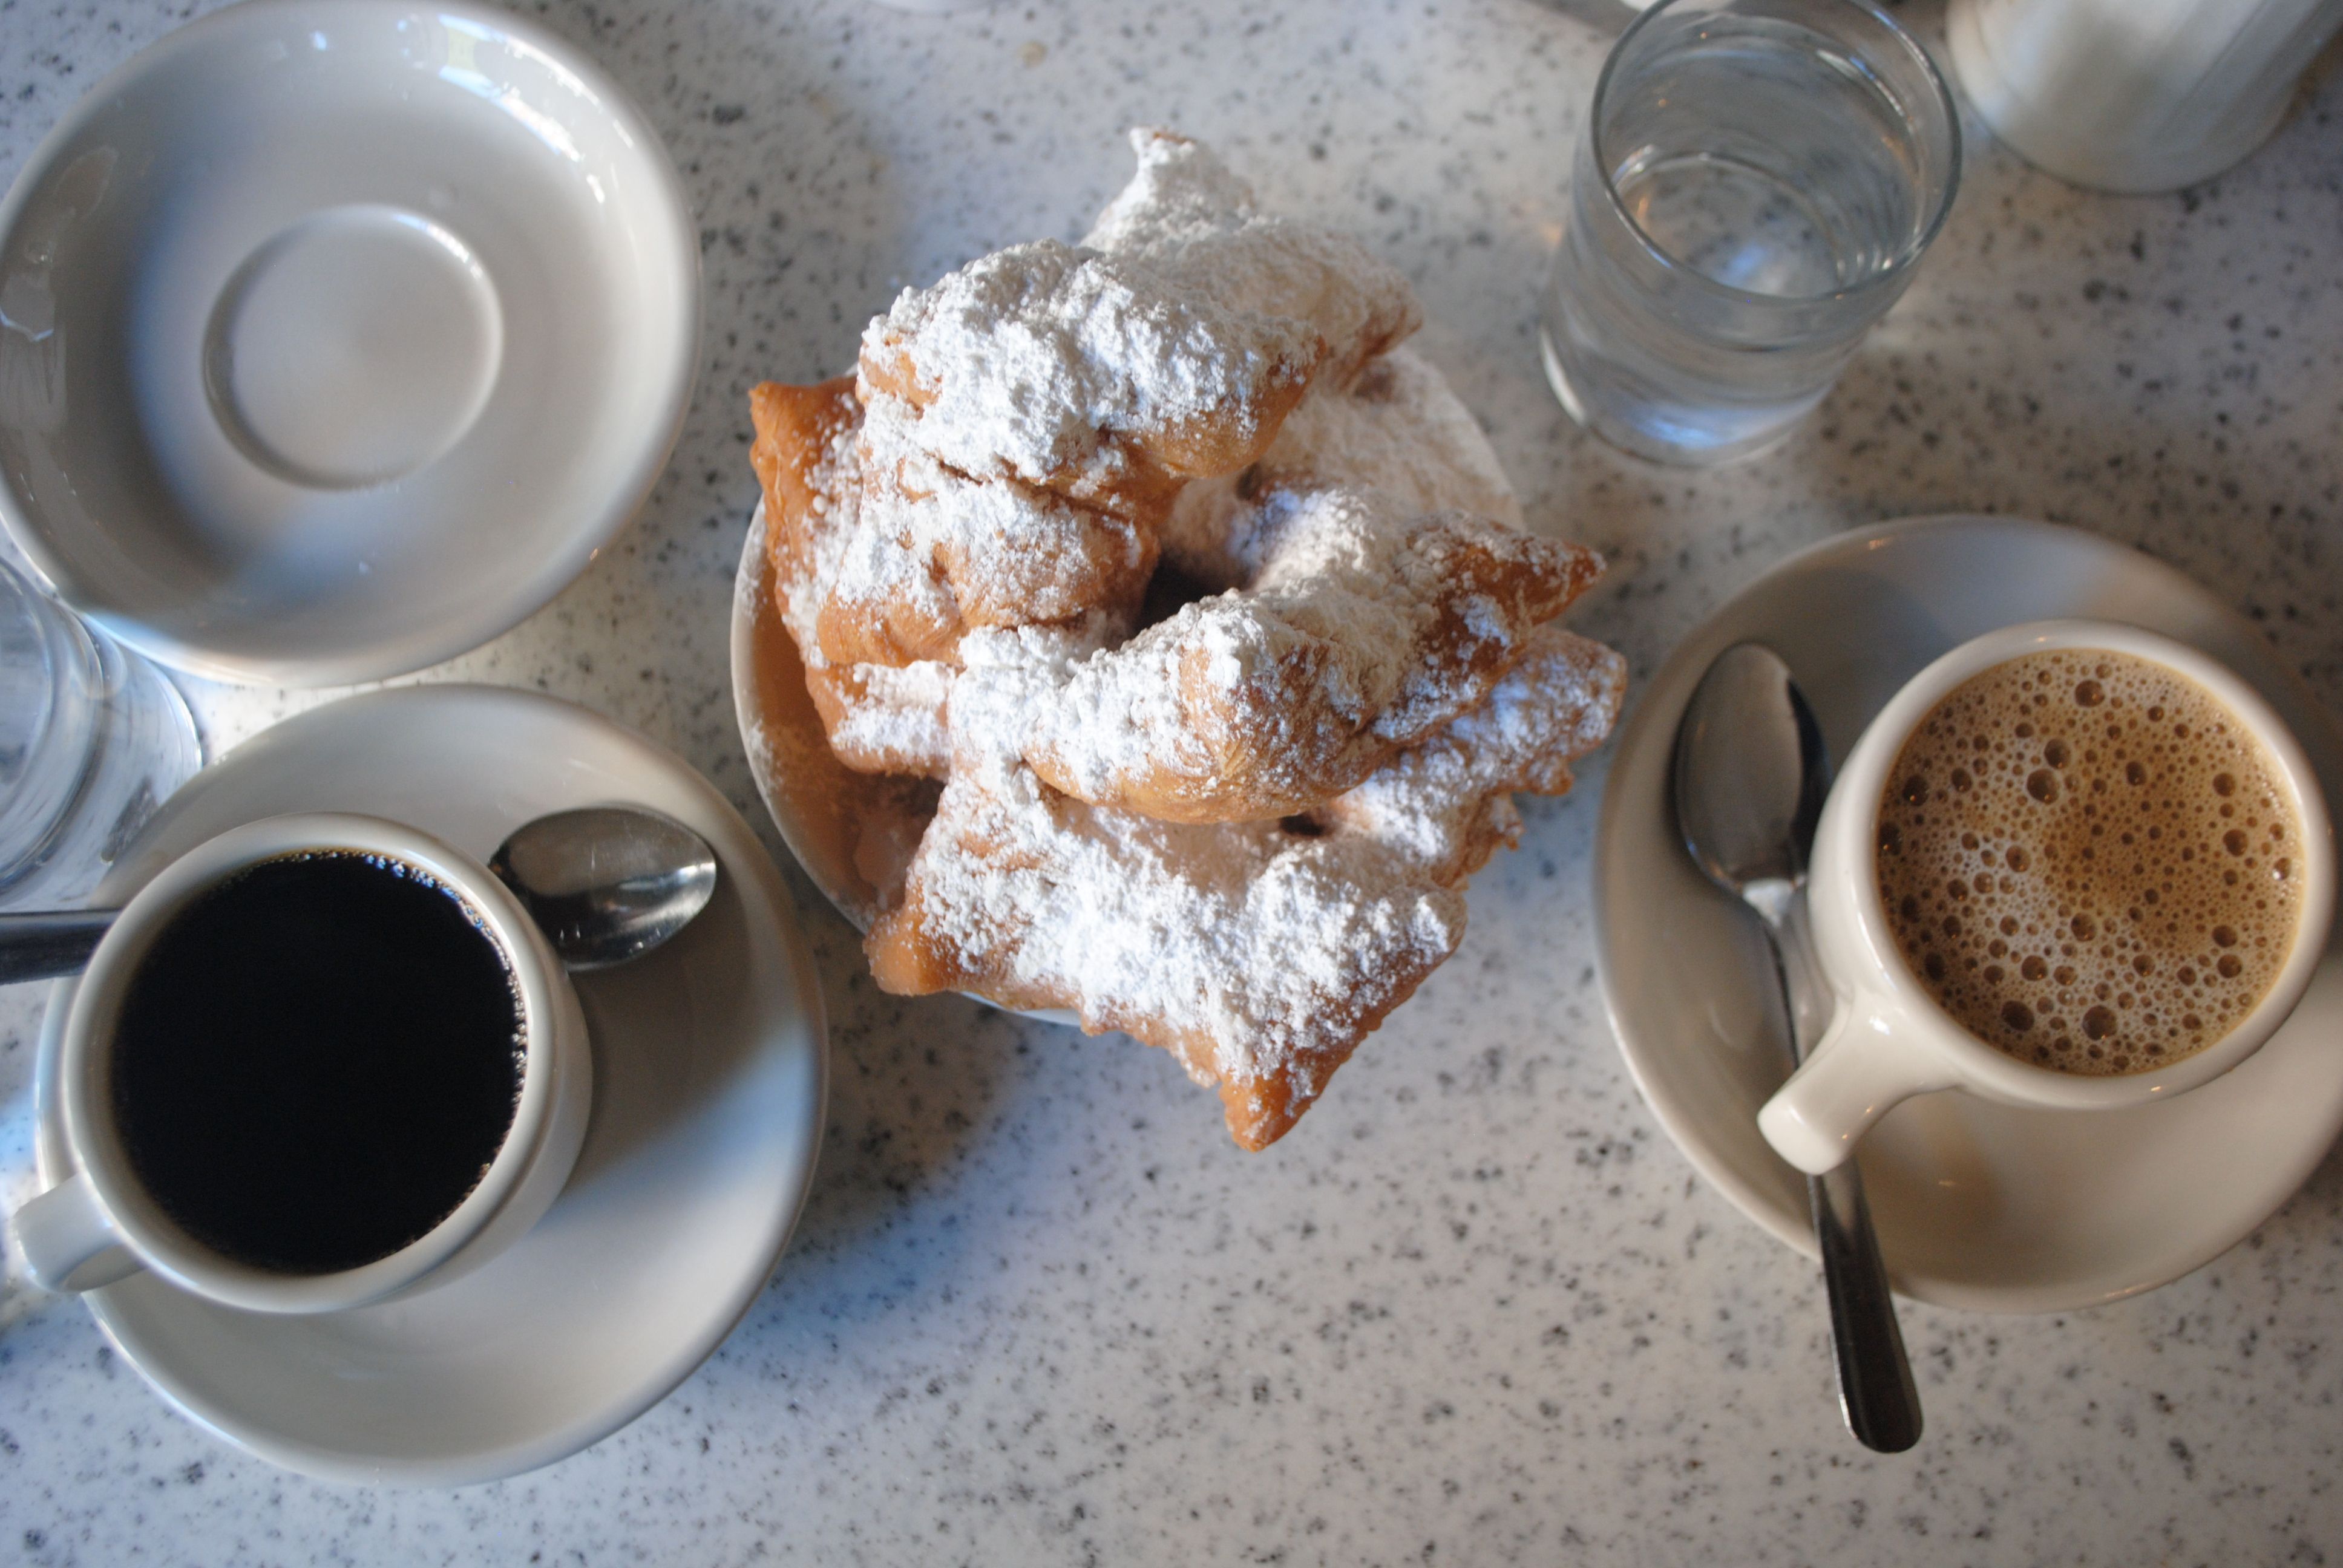 The 5 Best Beignets In New Orleans - Where To Get The Best Beignets In Nola